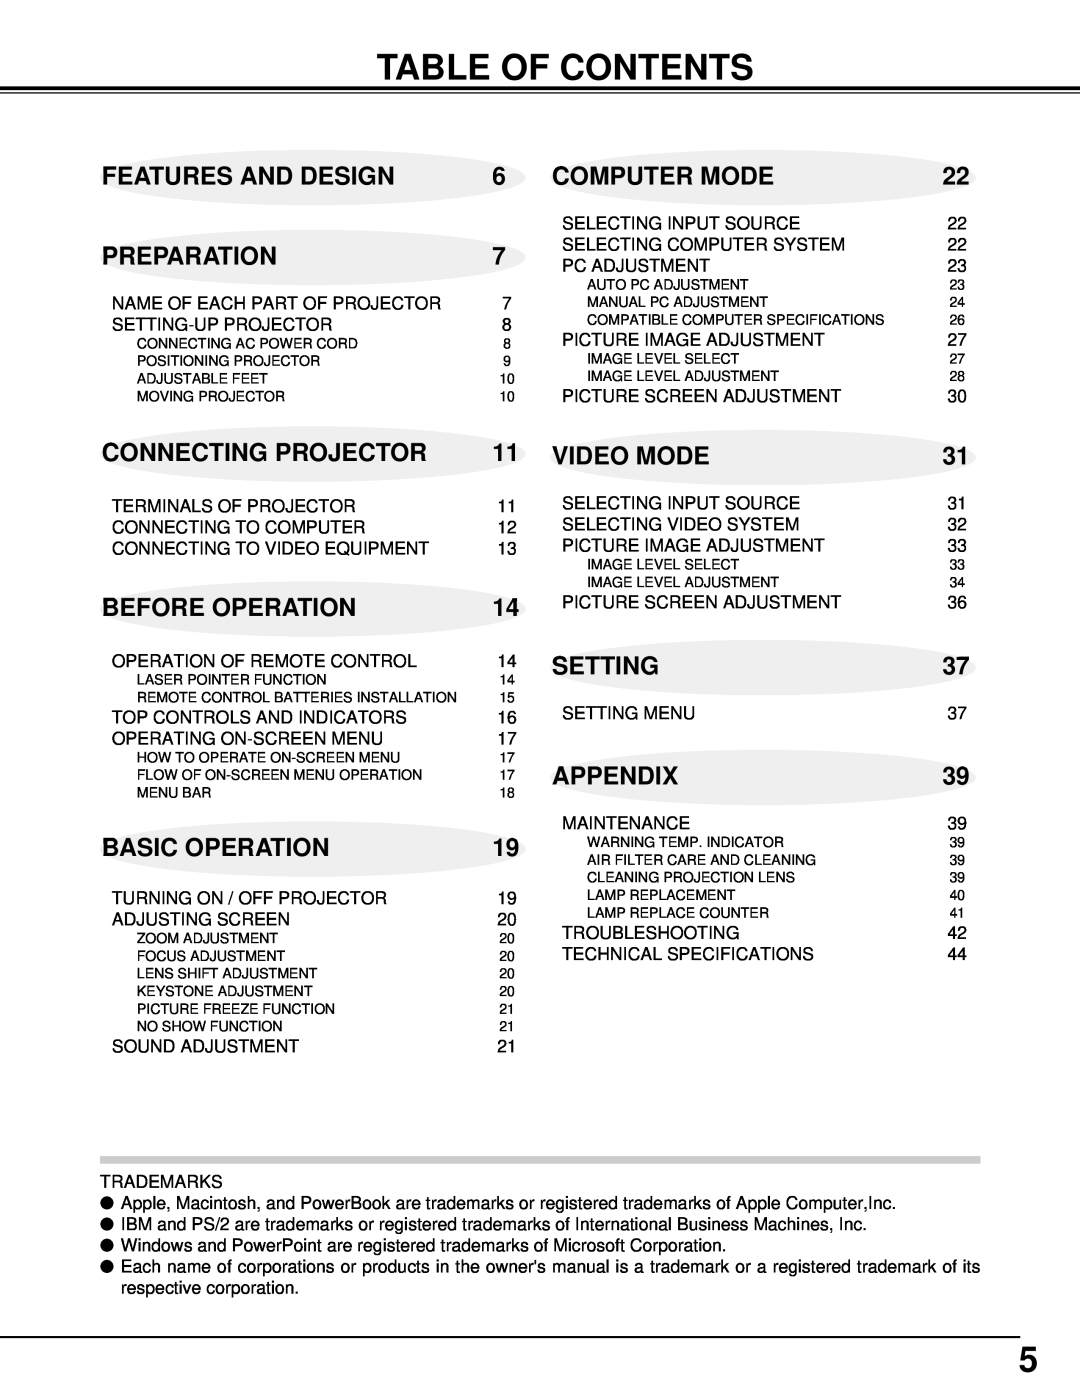 Sanyo PLV-70 Table Of Contents, Features And Design, Computer Mode, Preparation, Connecting Projector, Video Mode, Setting 